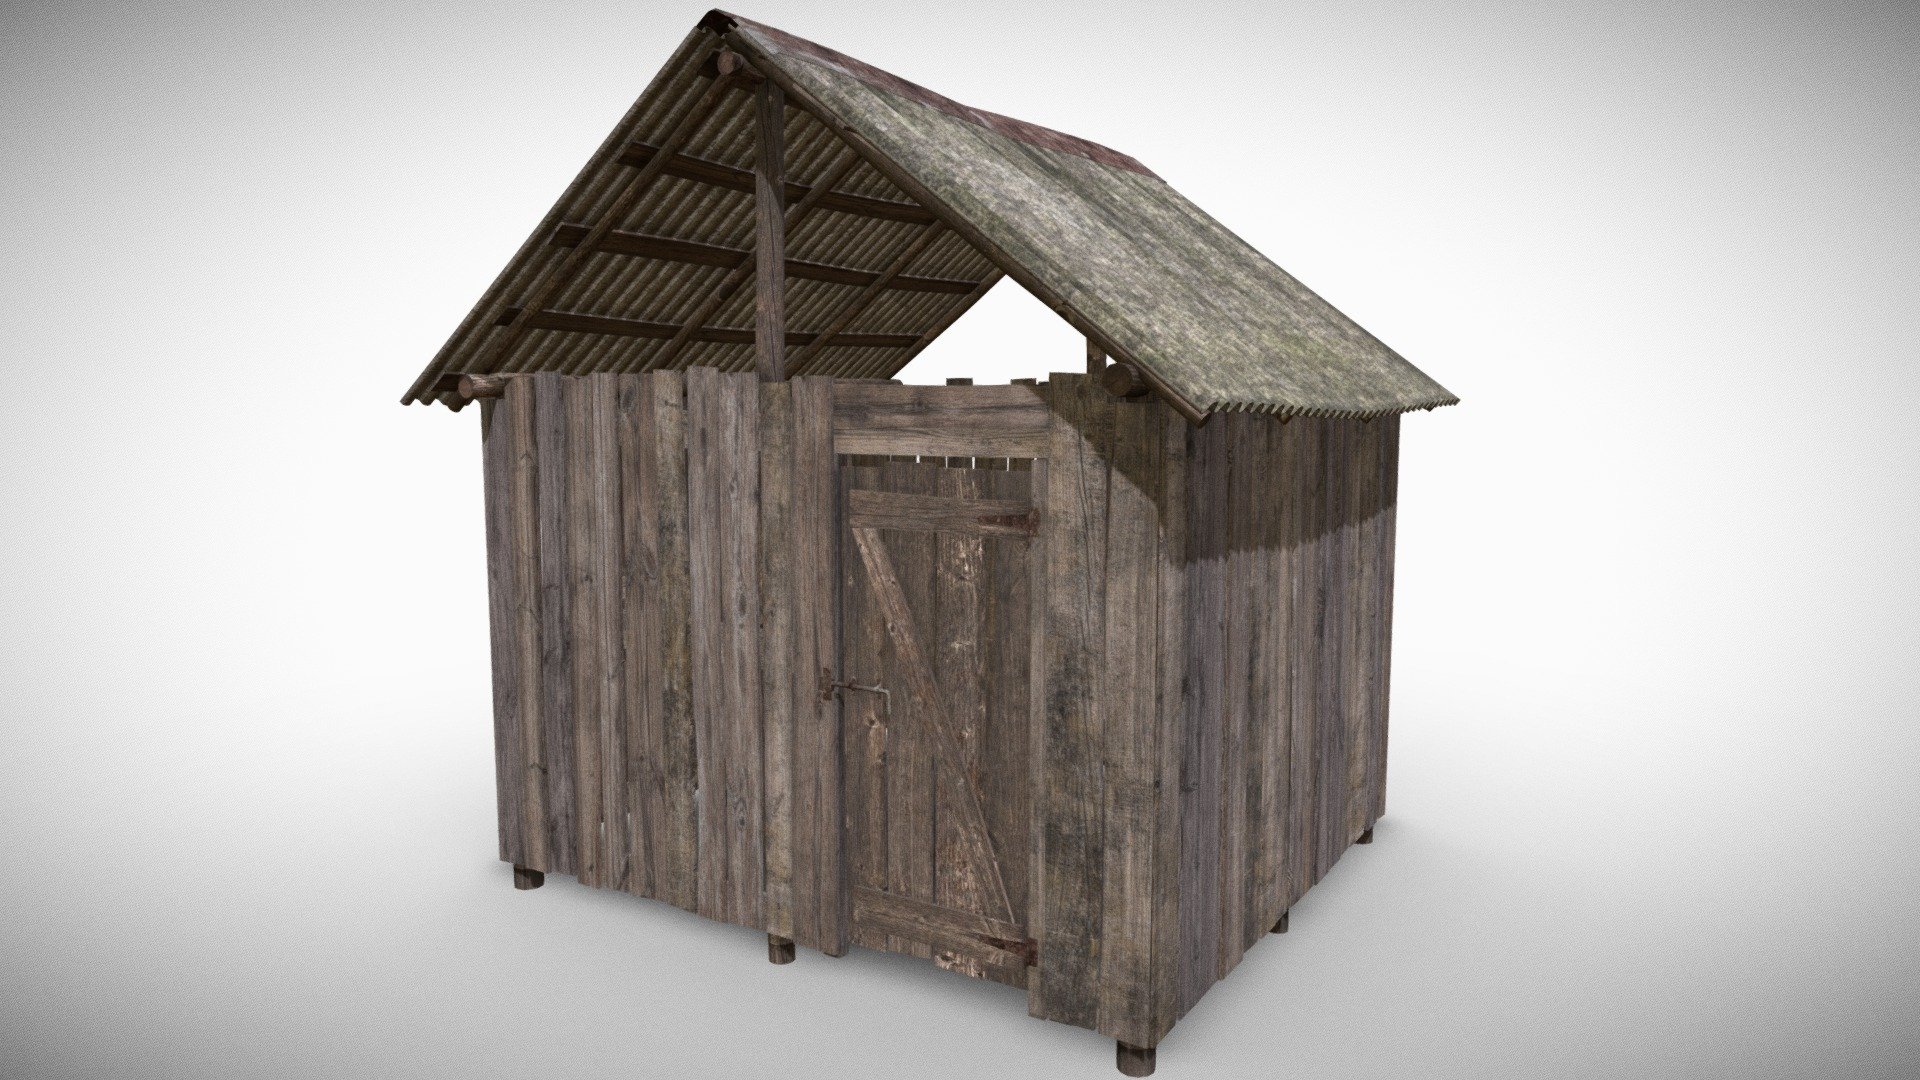 Highly detailed game ready 3d model of an old wooden shed. The building is enterable, the door is a separate object 3d model